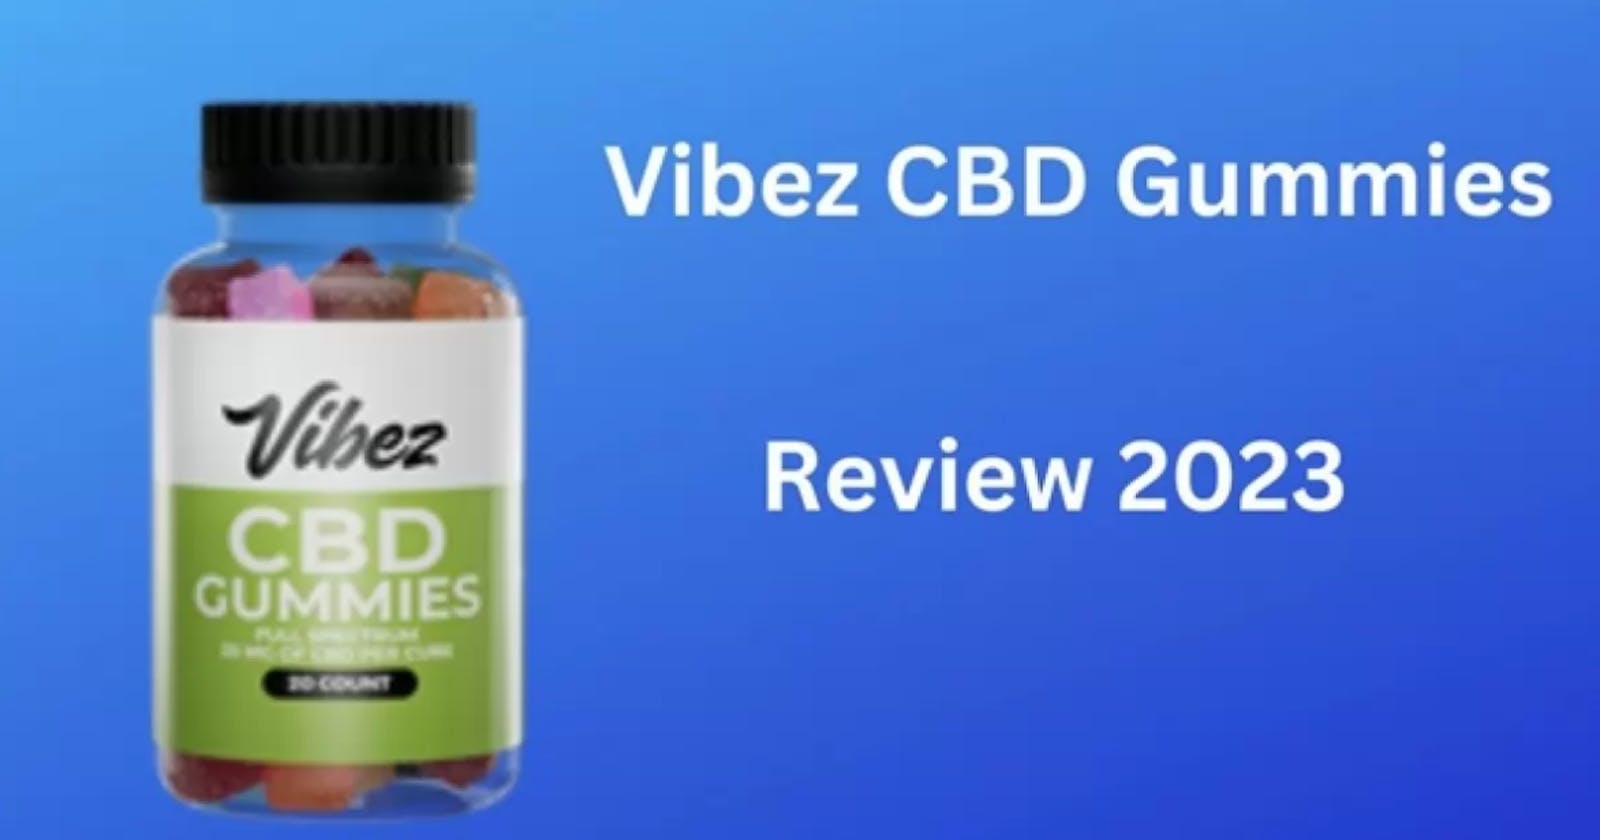 Vibez CBD Gummies Reviews, Amazon, Cost, Price, For Sale, For Kidneys, Shark Tank, Website, Ingredients, & Where To Buy?